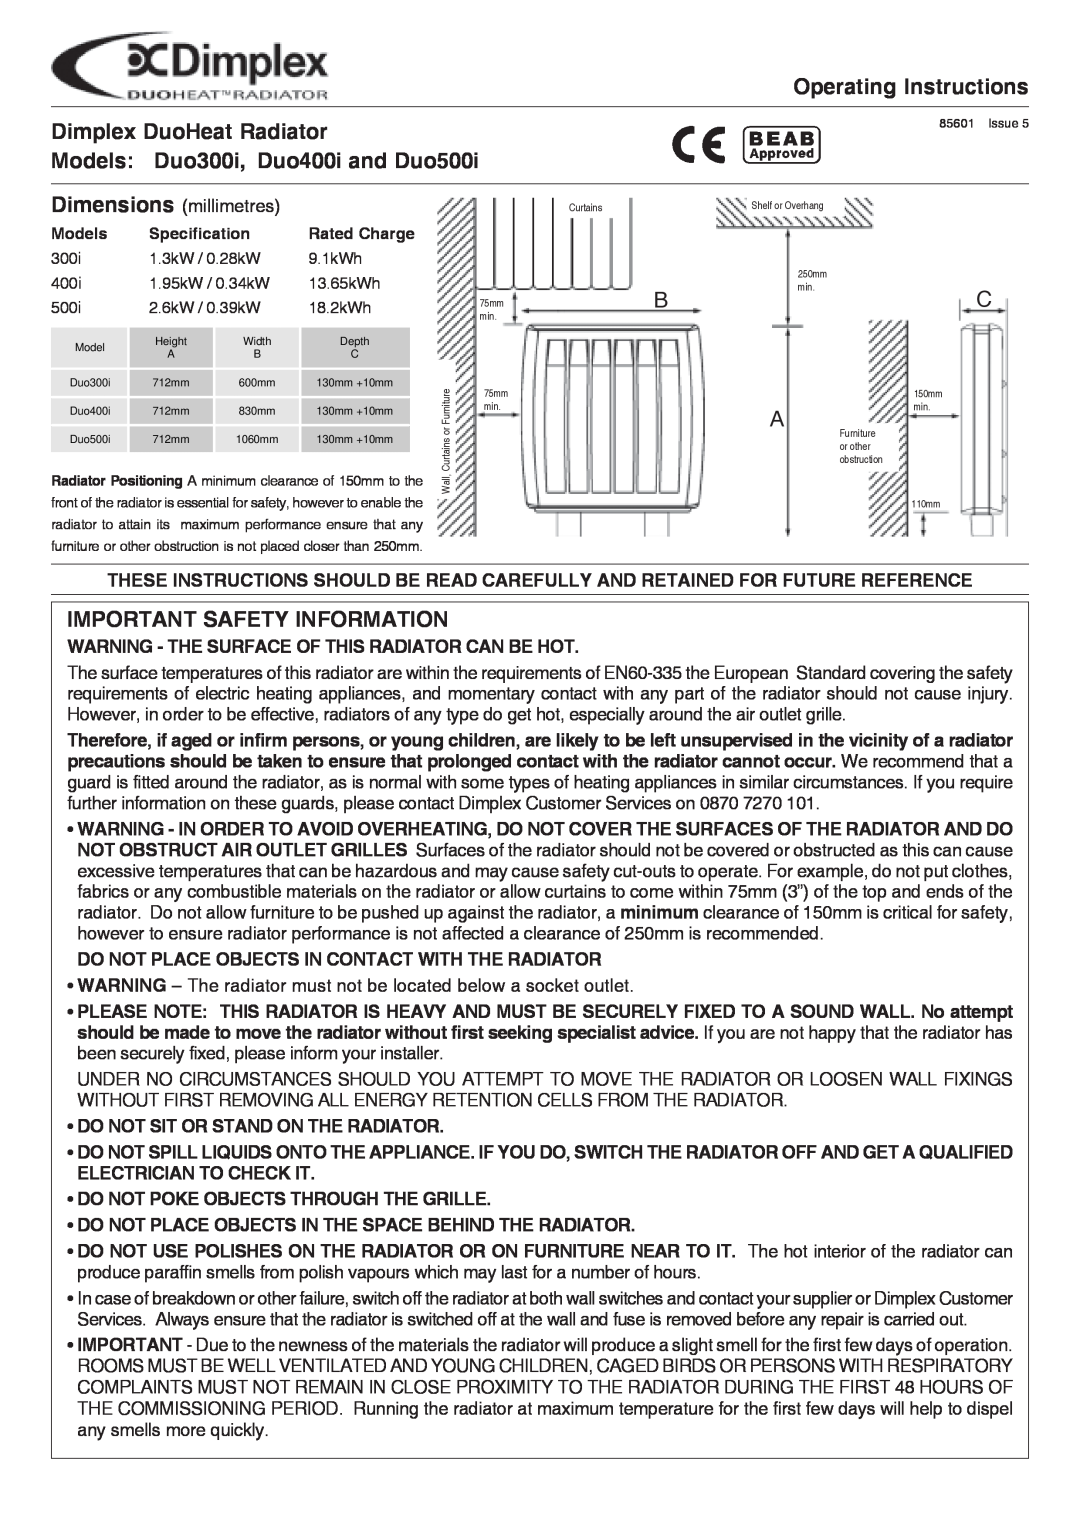 Dimplex Duo300i operating instructions Operating Instructions, Dimplex DuoHeat Radiator, Important Safety Information 